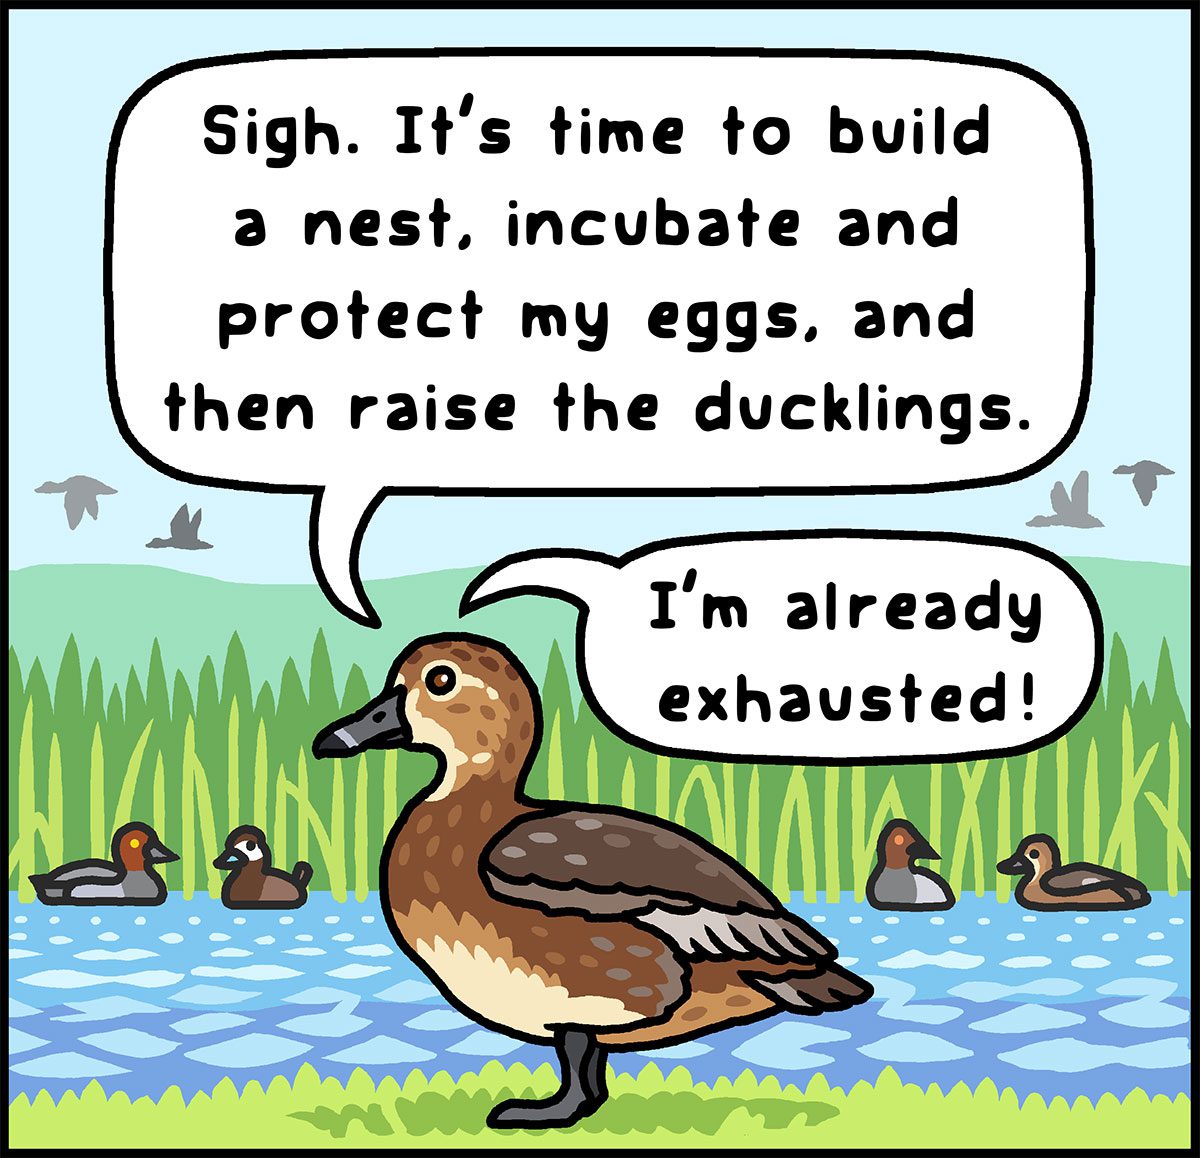 Cartoon of duck thinking, "Sigh. It's time to build a nest, incubate and protect my eggs, and then raise the ducklings. I'm already exhausted!"